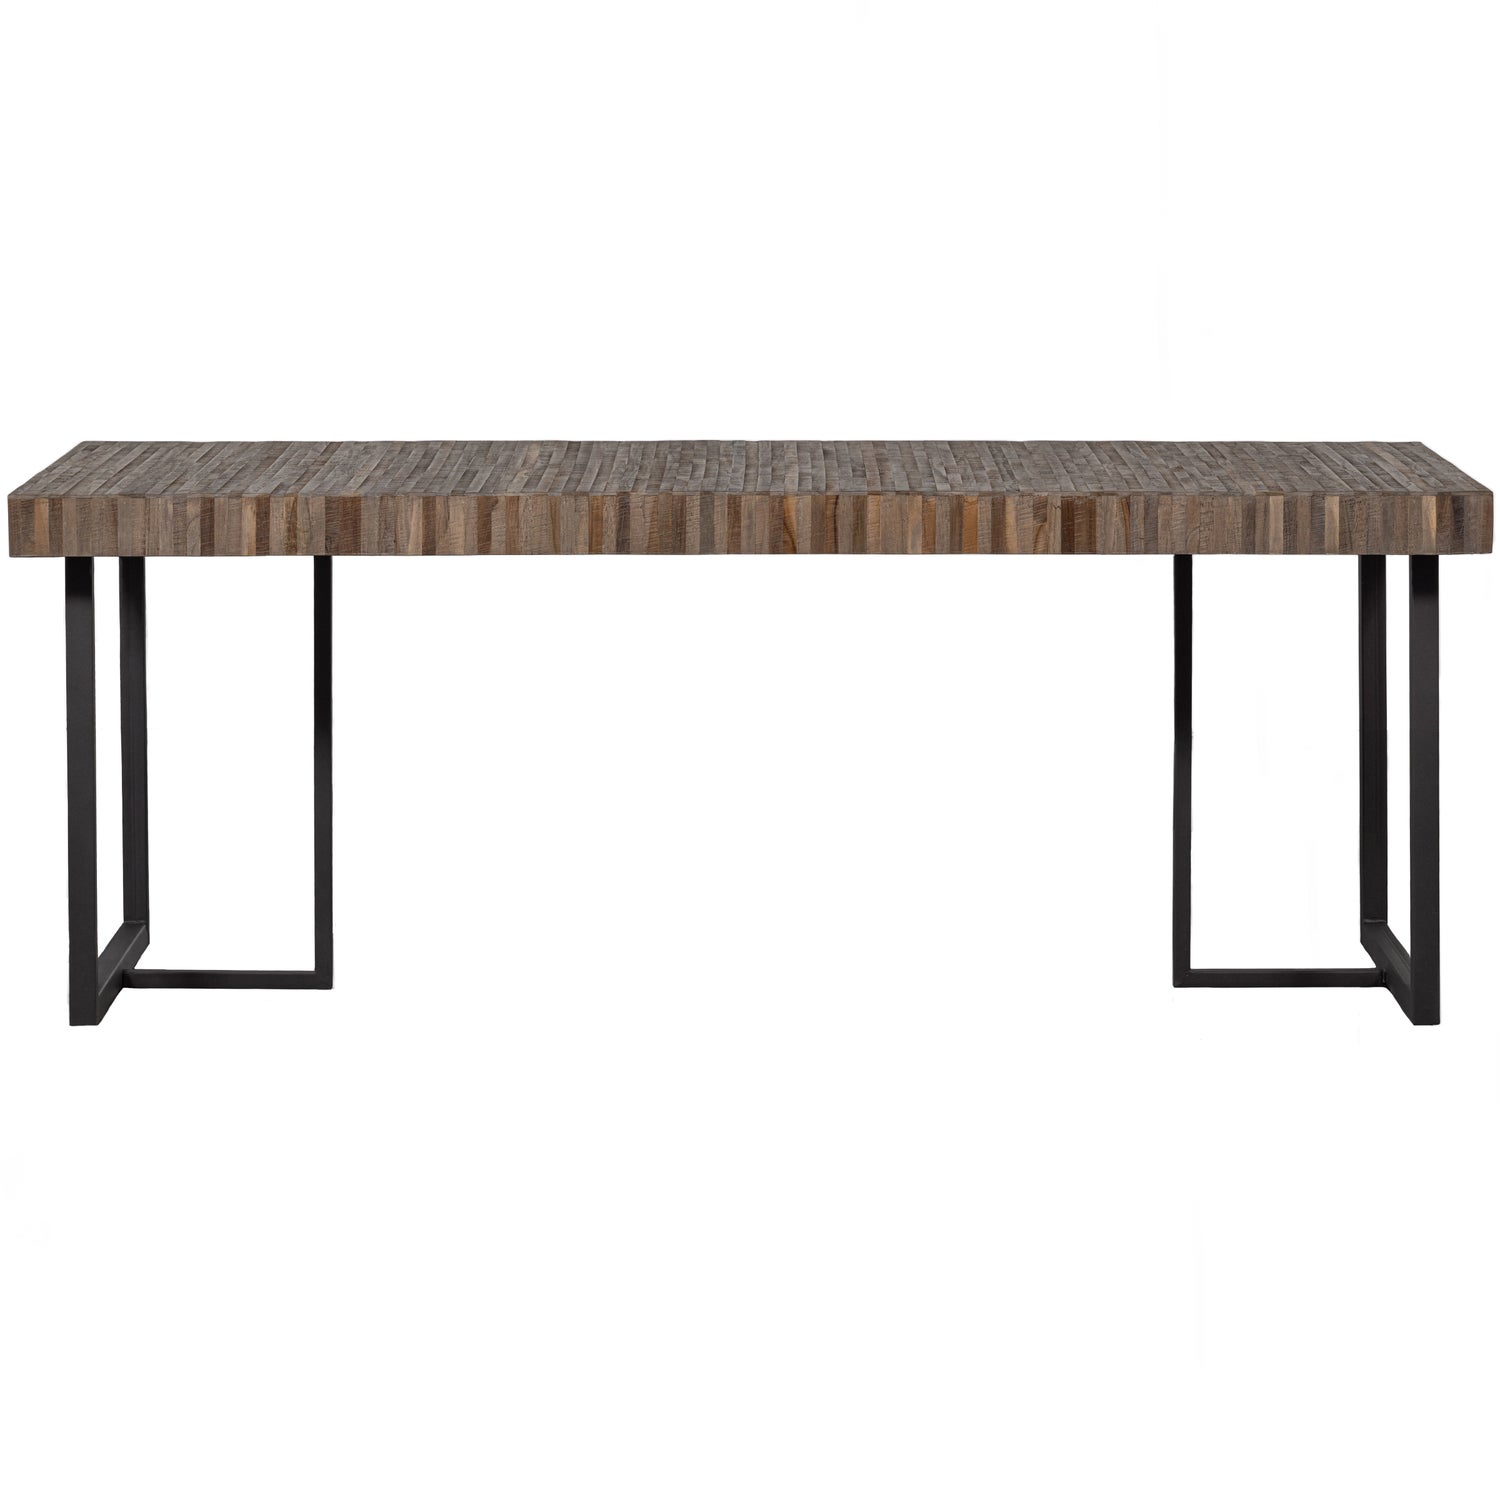 373924-N-01_VS_WE_Maxime_eettafel_recycled_hout_naturel_220x90cm.jpg?auto=webp&format=png&width=1500&height=1500